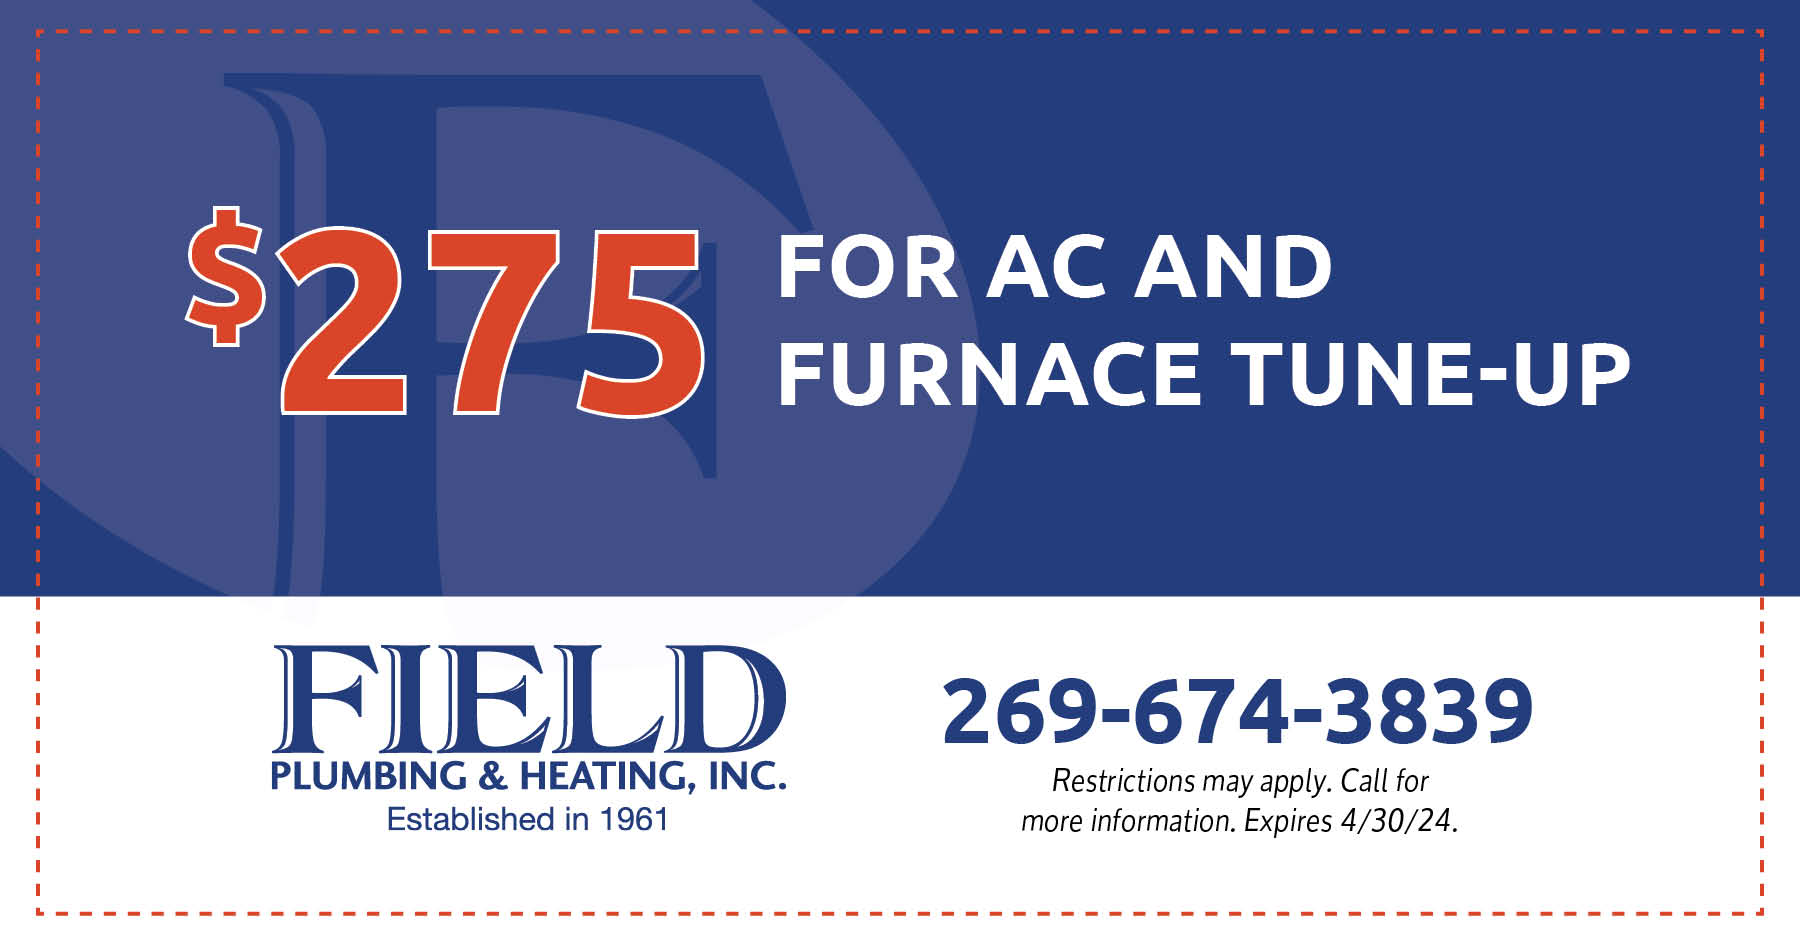 $275 for AC and Furnace tune-up coupon.